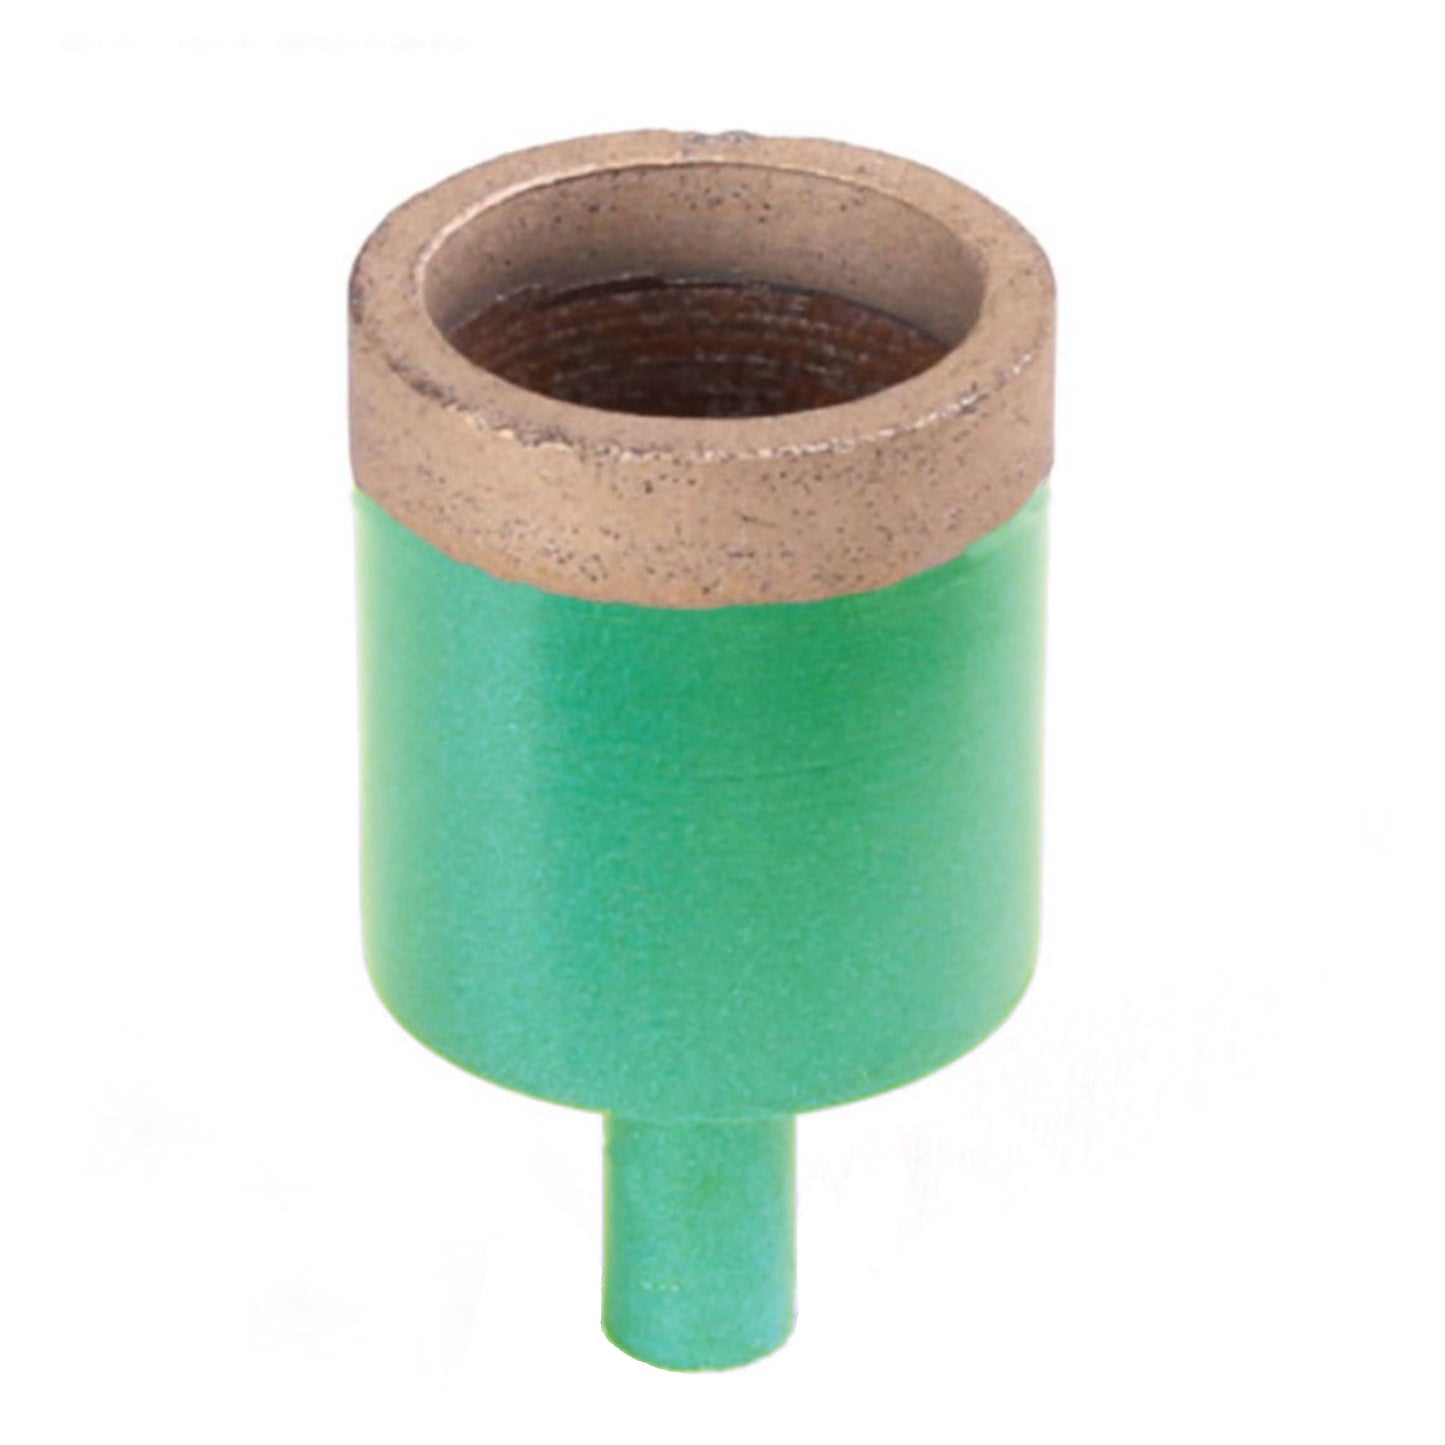 18mm - Grinding Cup